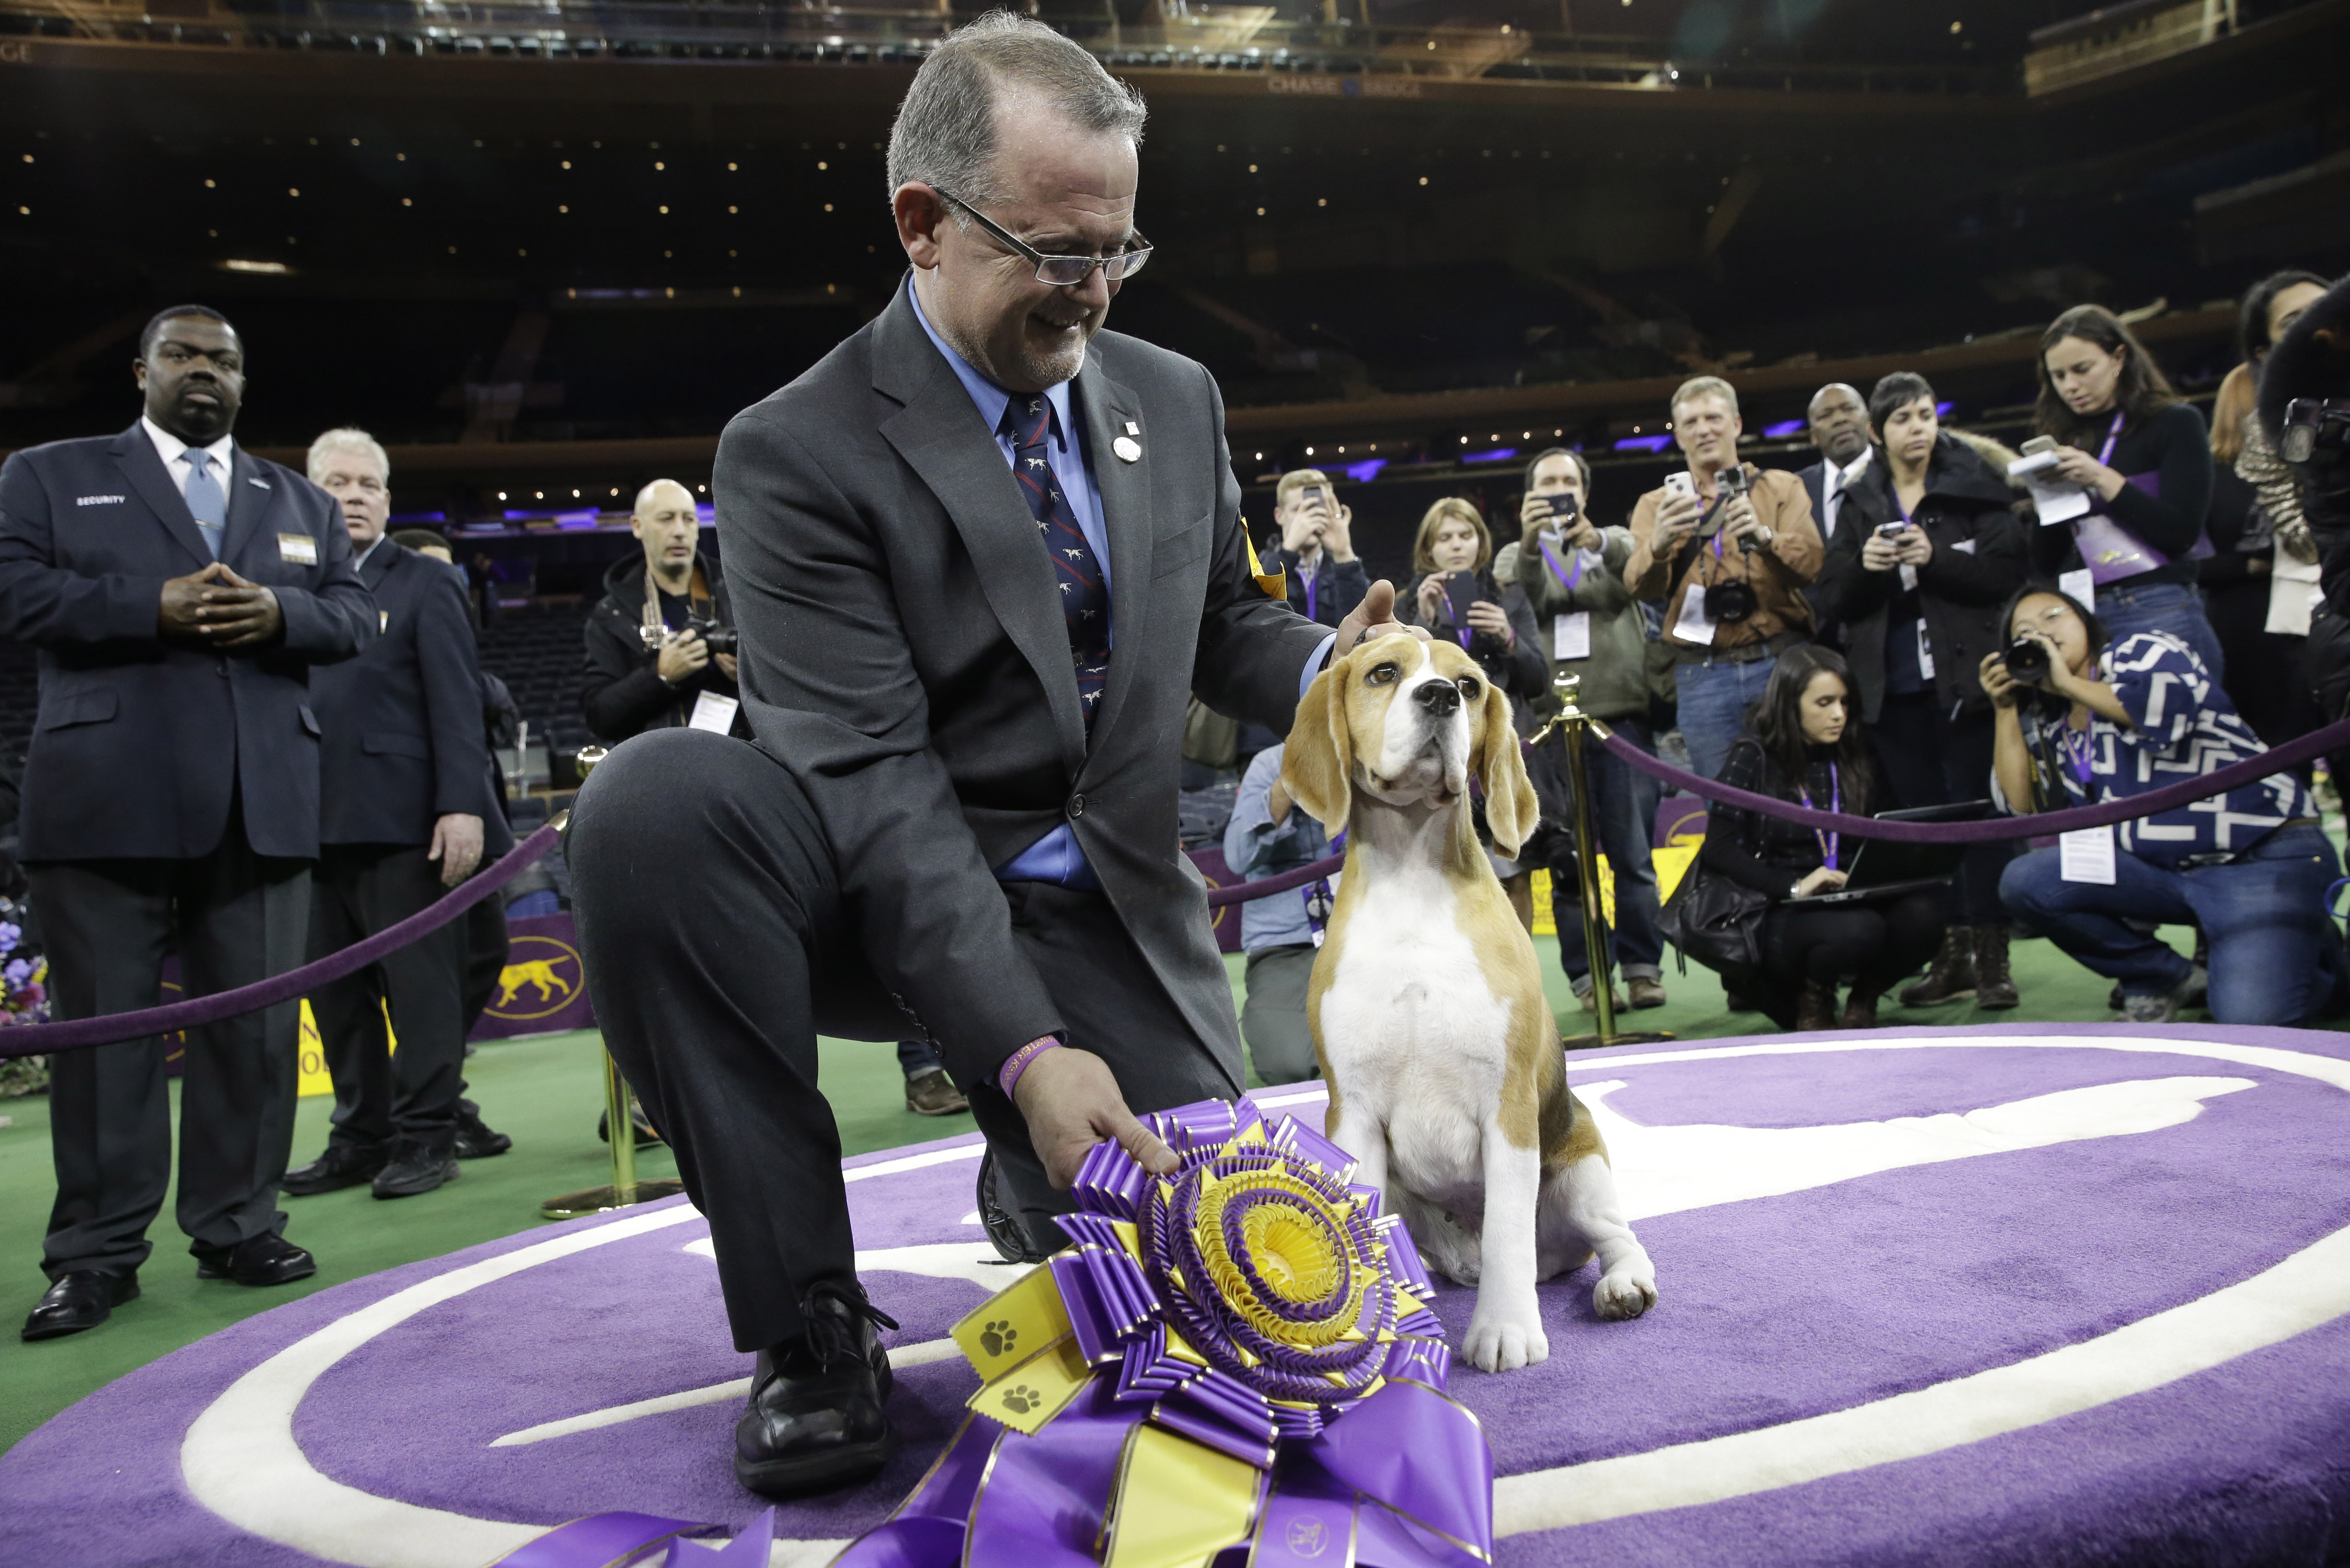 Westminster Dog Show 2015 Results: Best of Breed Winners and Day 2 Recap | Bleacher Report